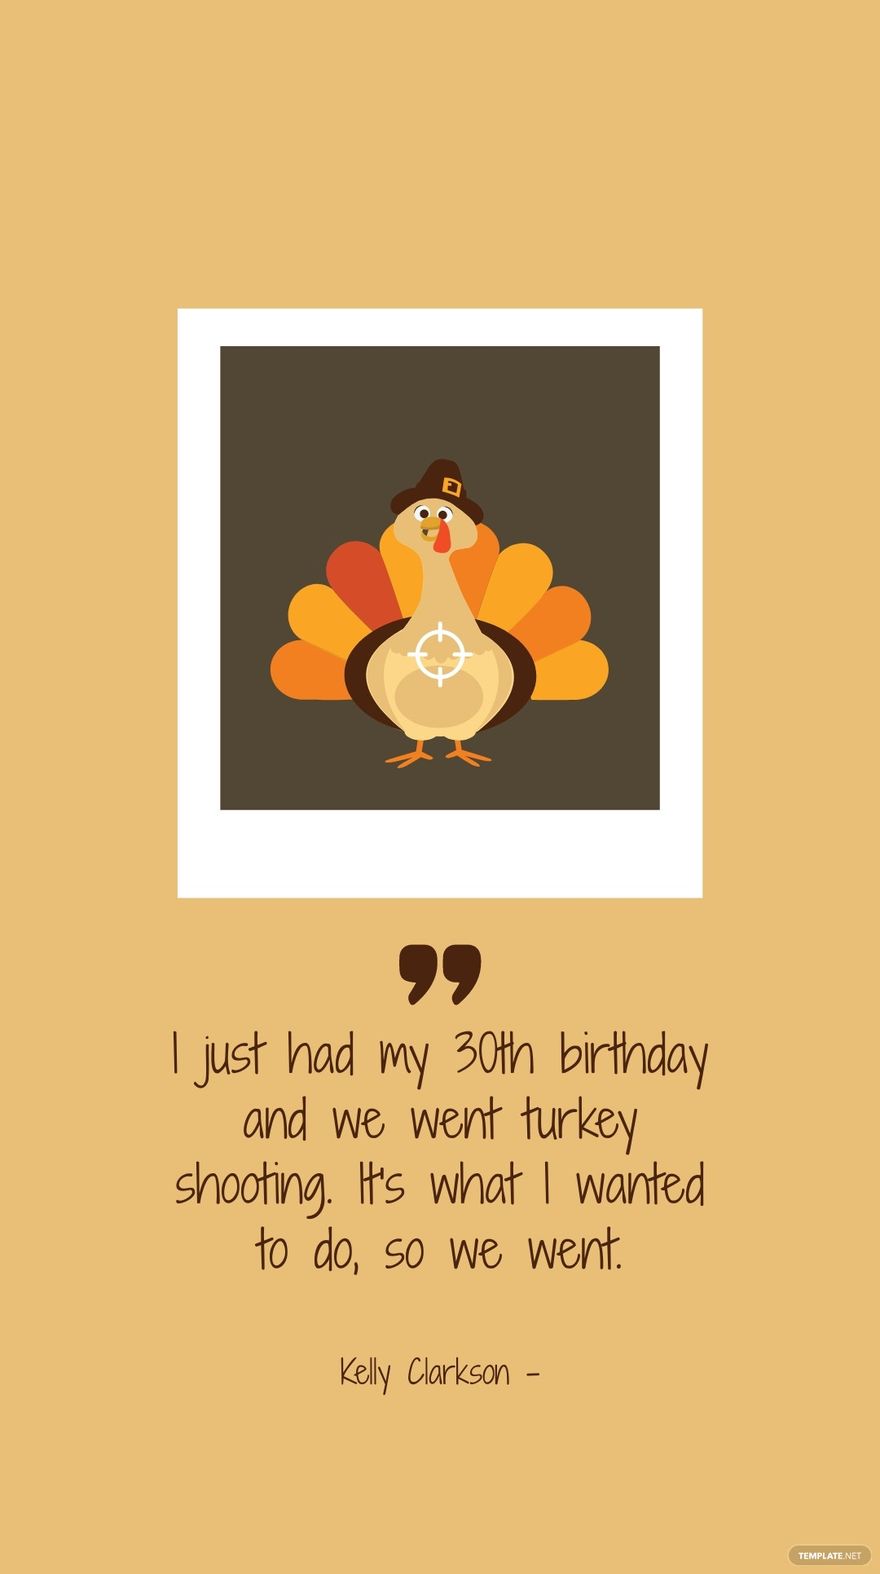 Free Kelly Clarkson - I just had my 30th birthday and we went turkey shooting. It's what I wanted to do, so we went. in JPG